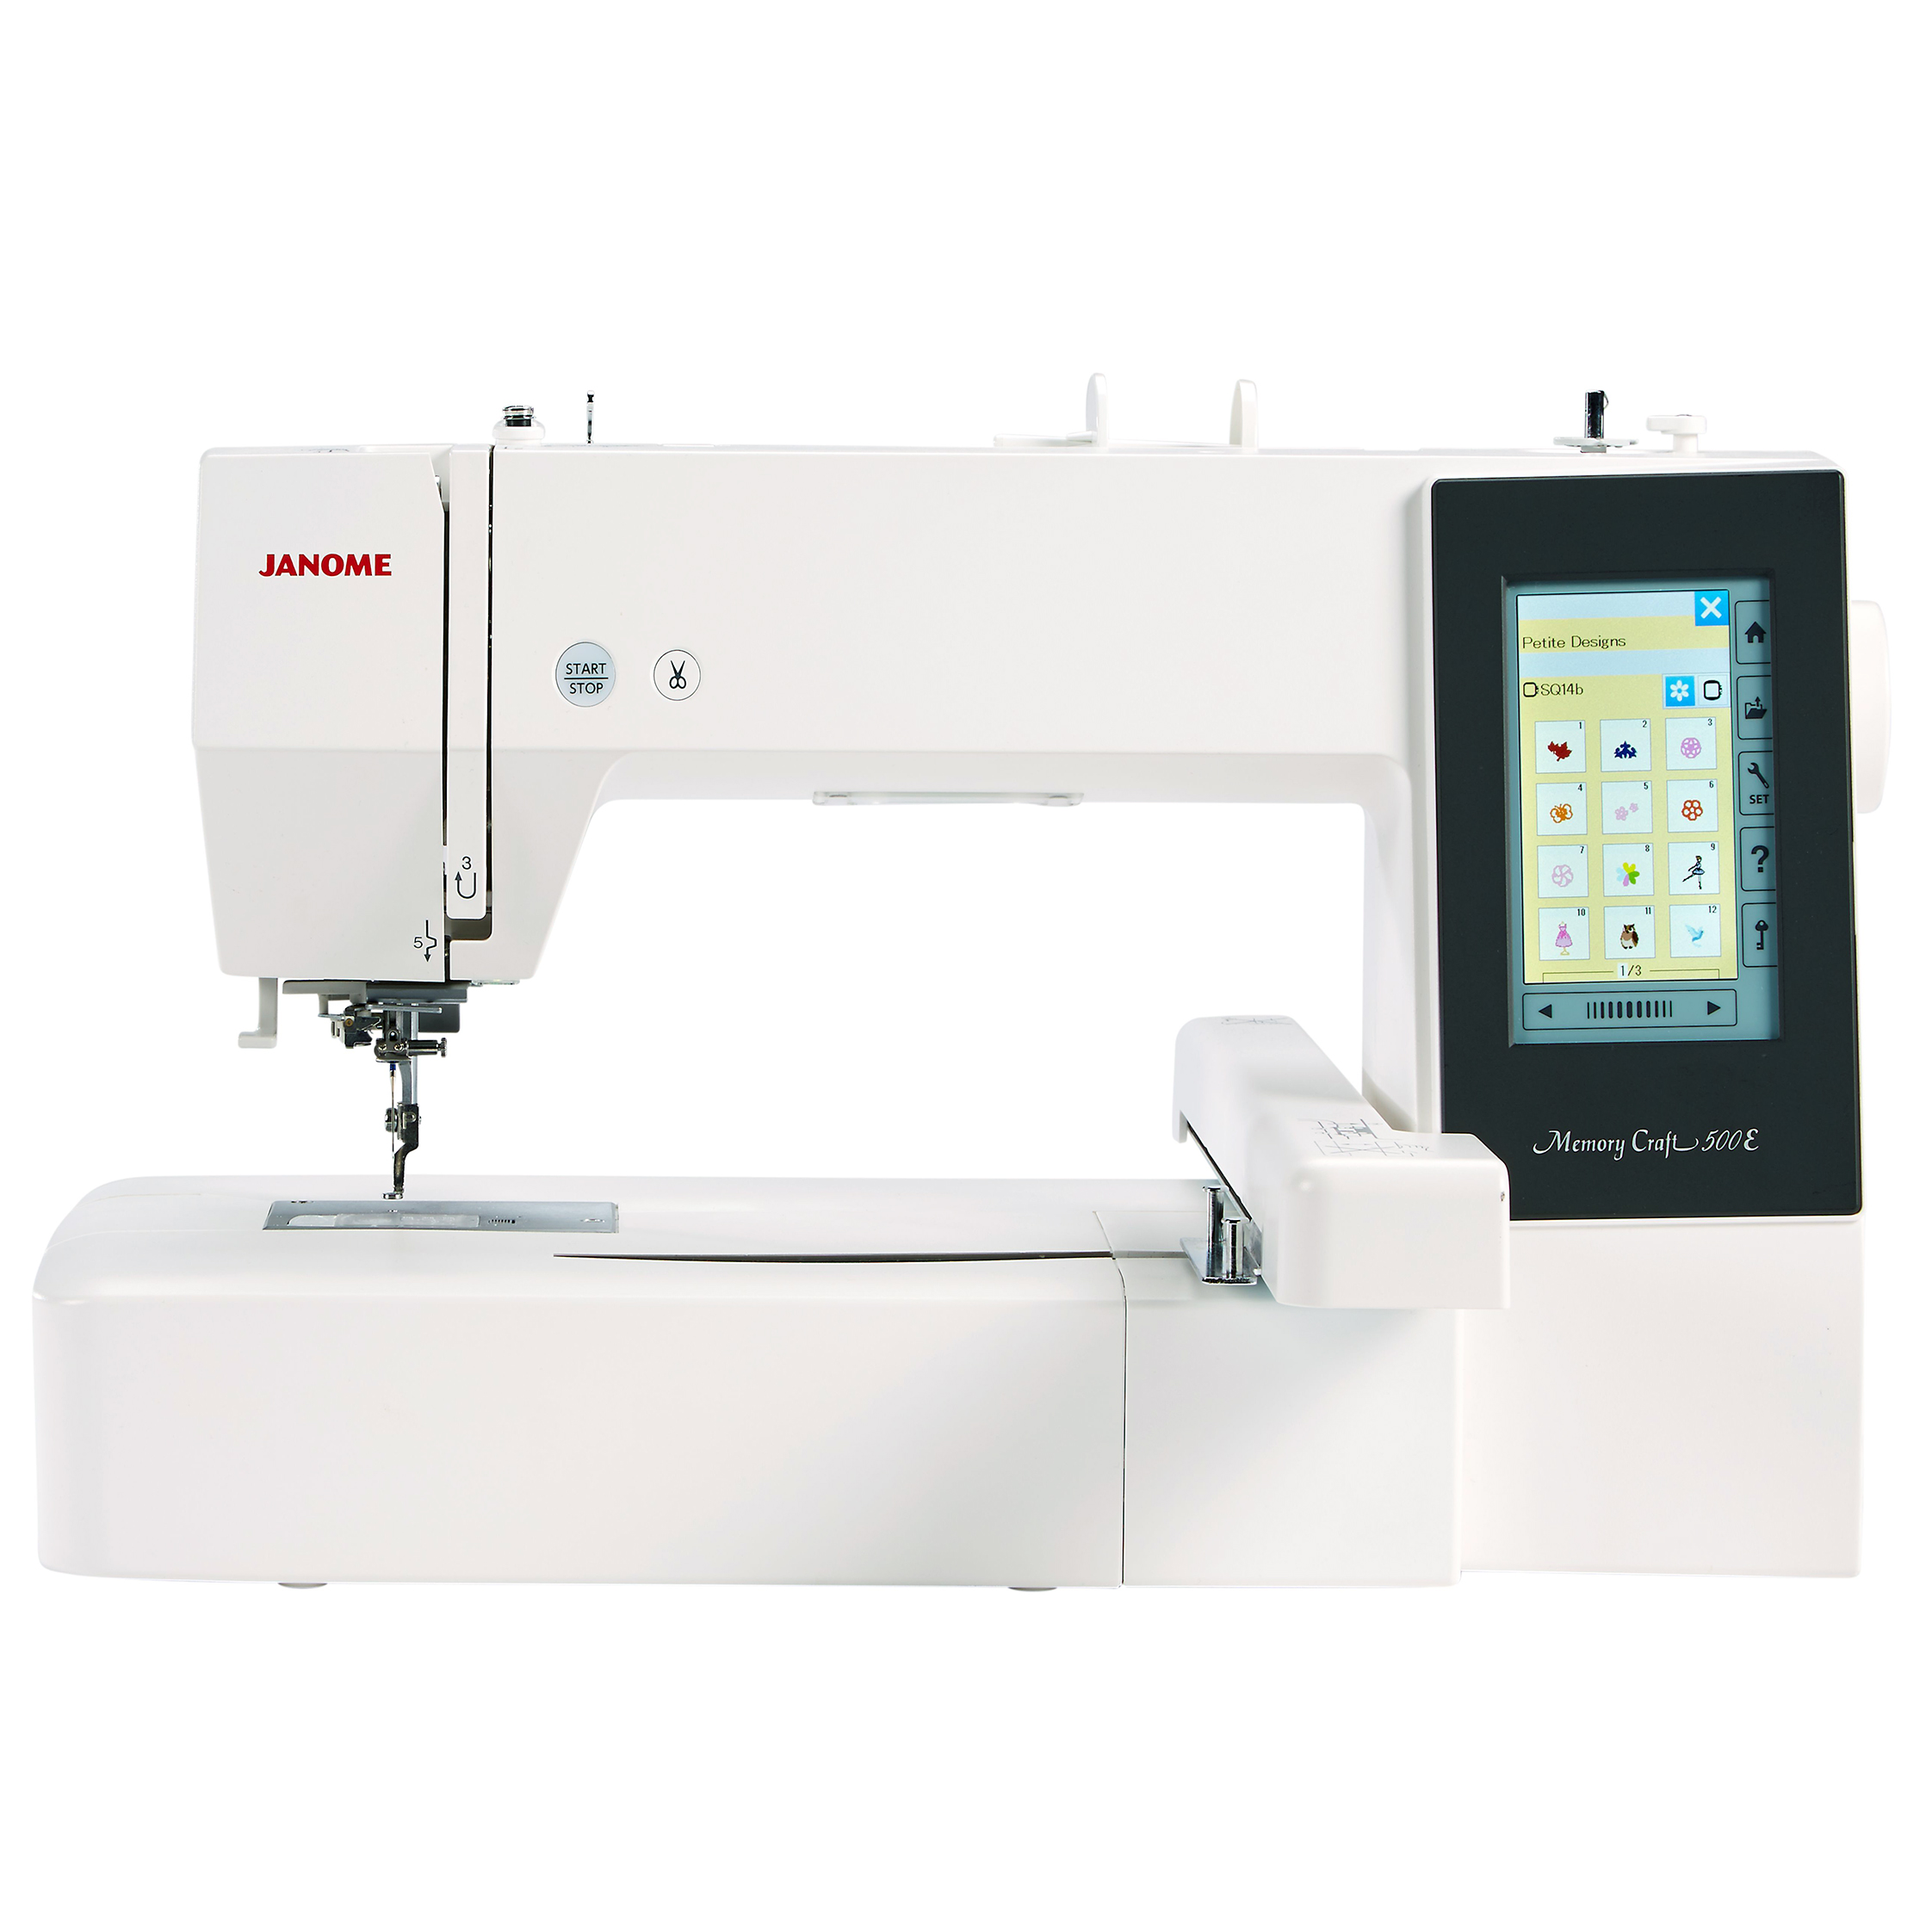 Janome Embroidery Accessories | Sewing Machine Accessories